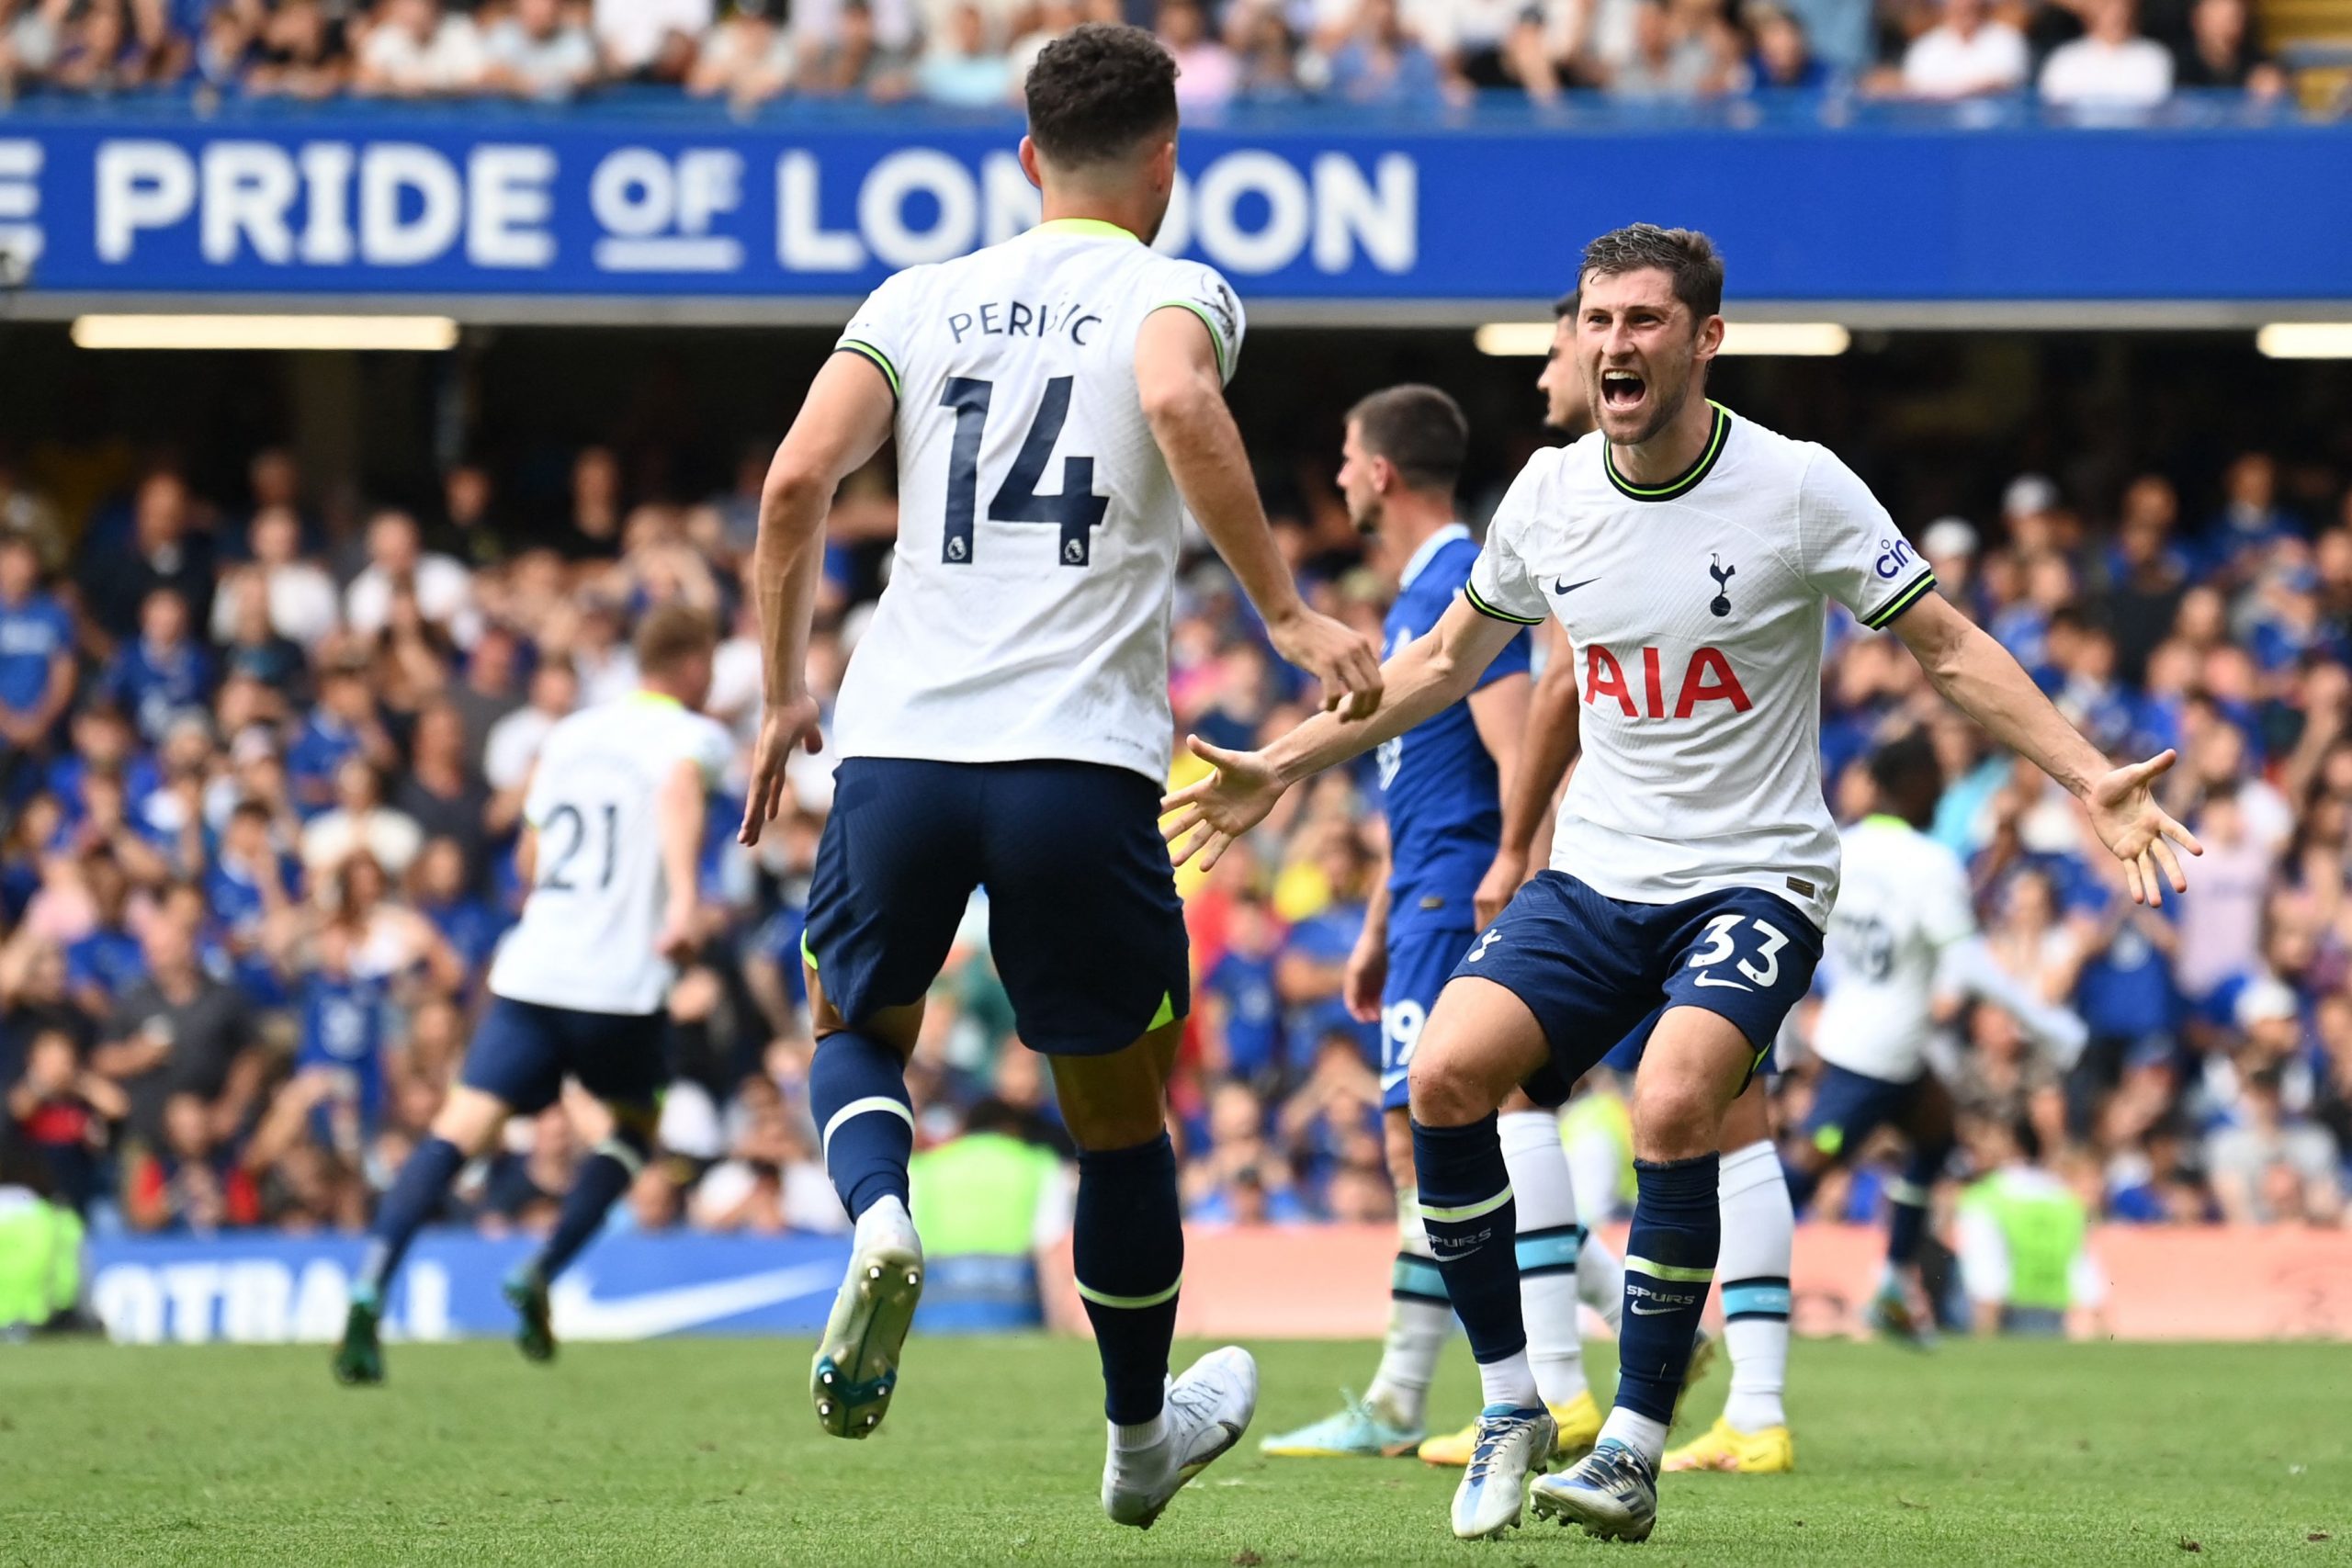 Antonio Conte praises Tottenham Hotspur for being mentally strong after win over Nottingham Forest.